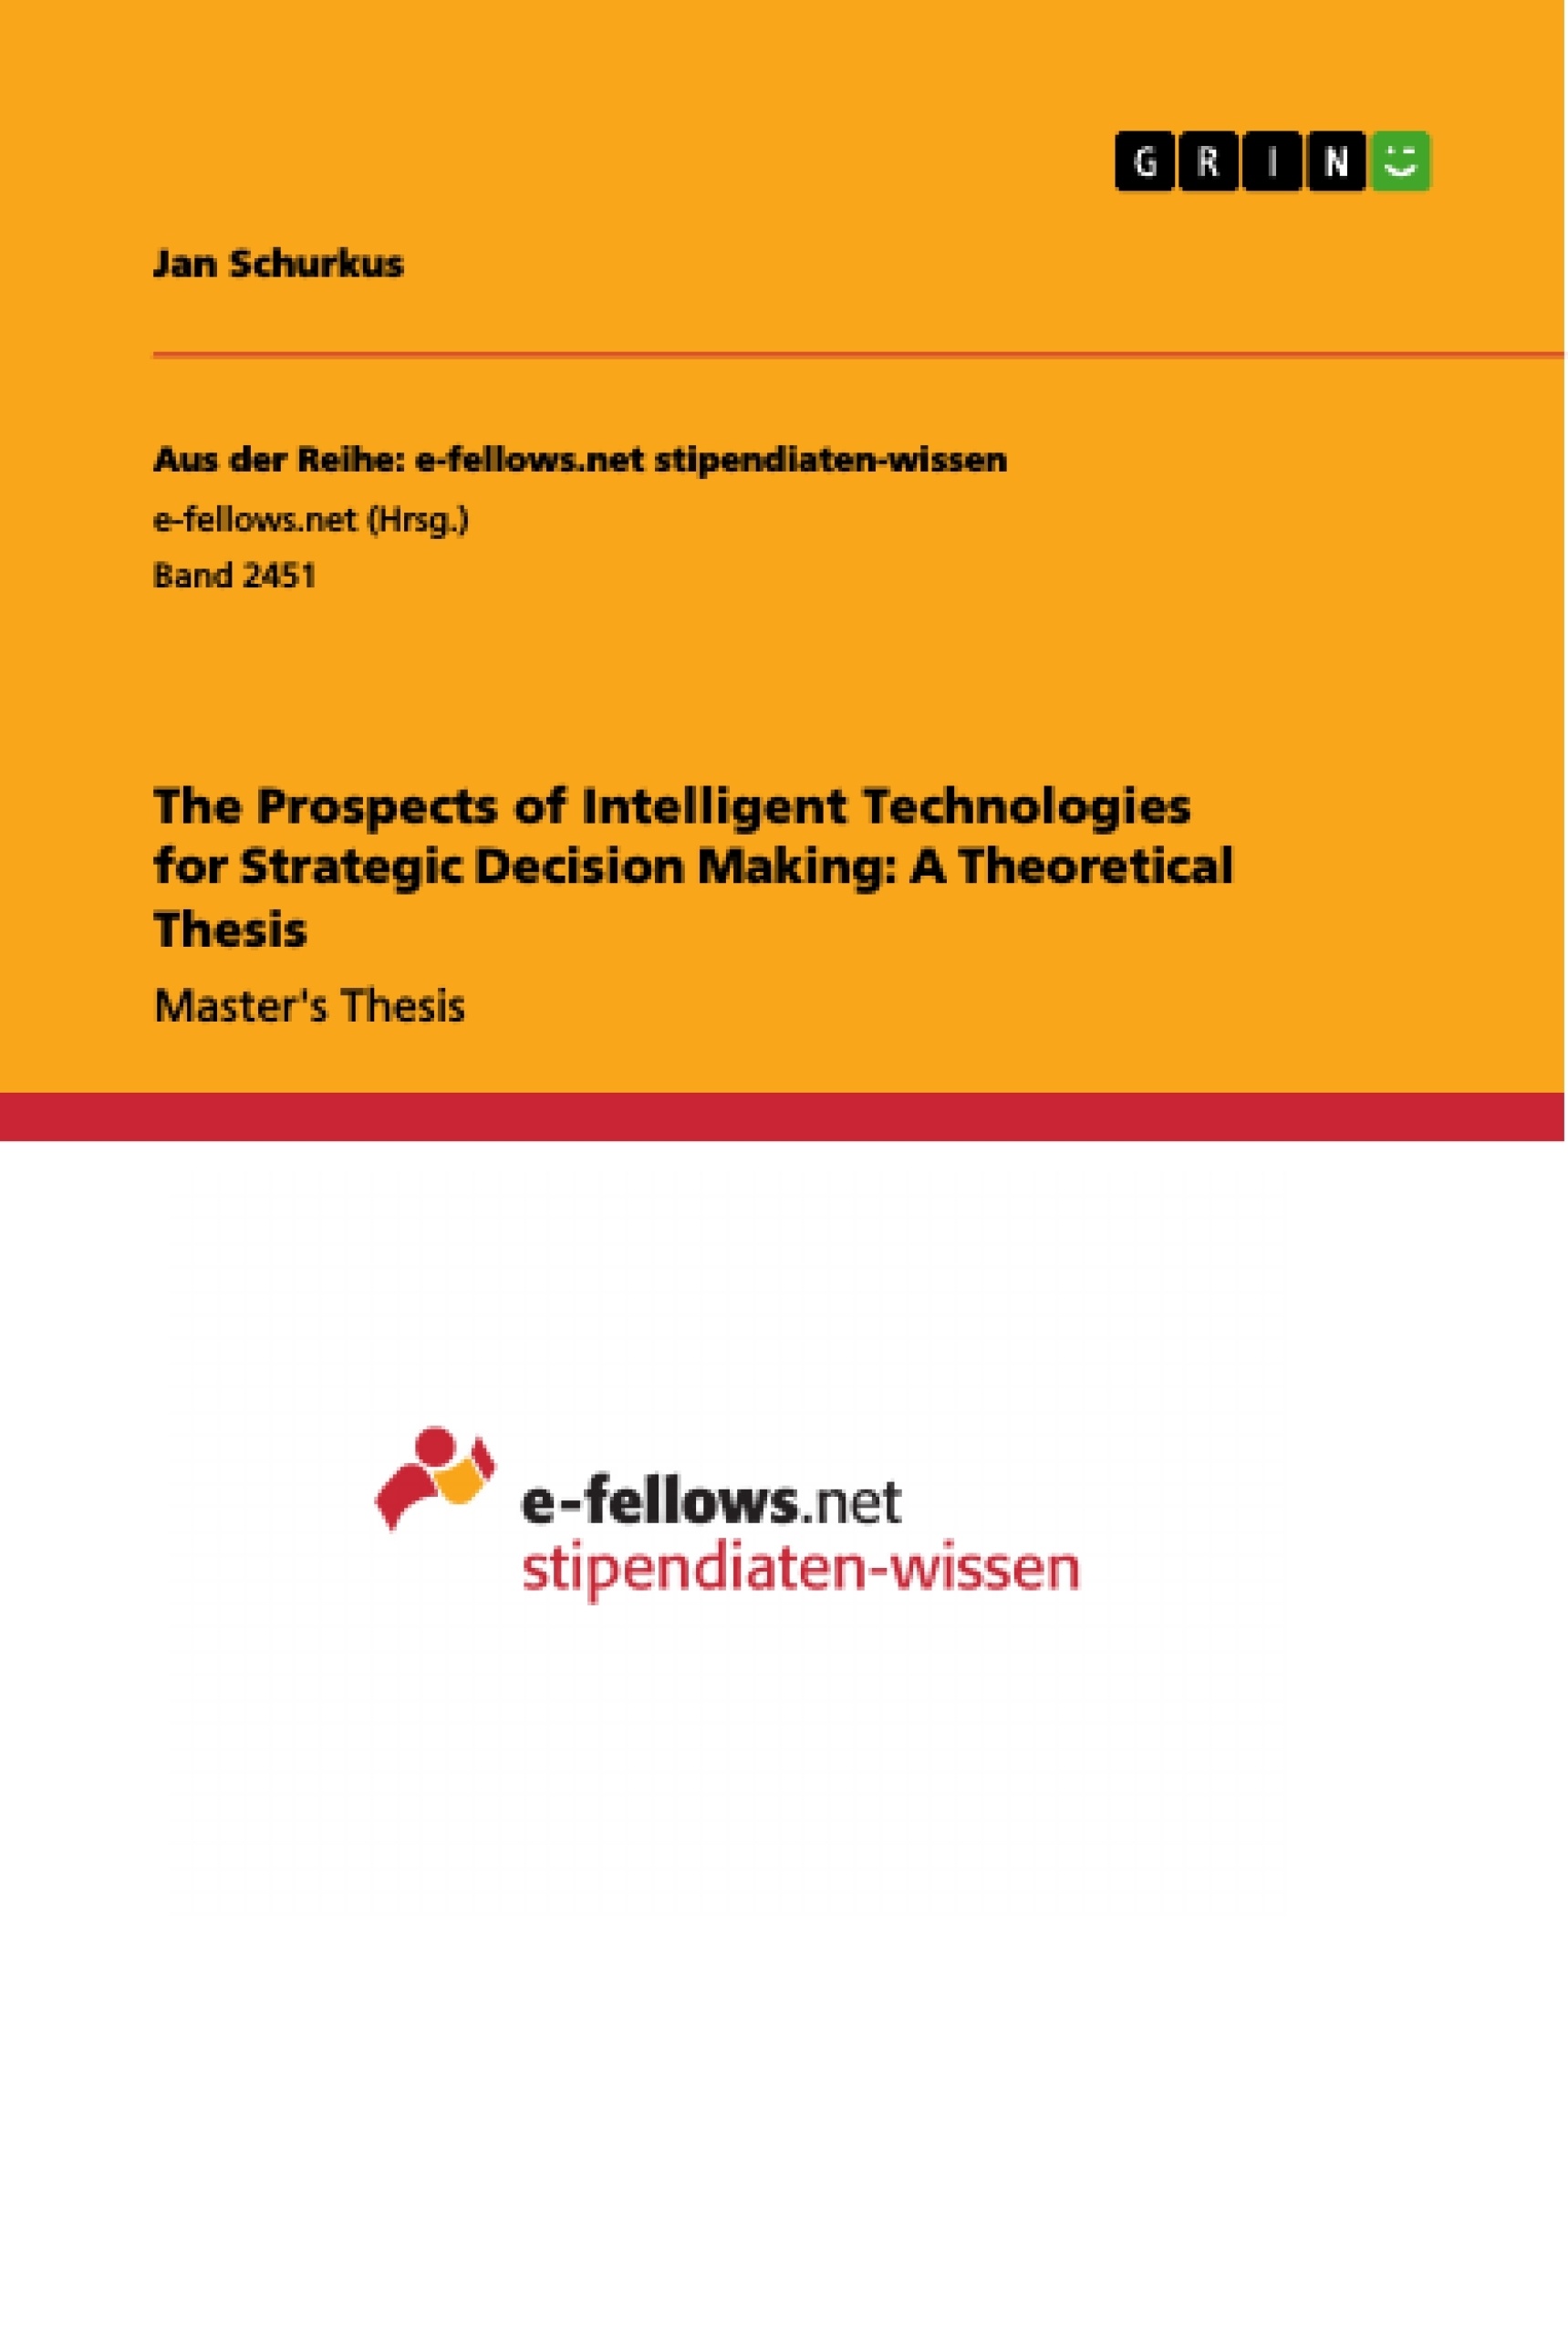 Titel: The Prospects of Intelligent Technologies for Strategic Decision Making: A Theoretical Thesis